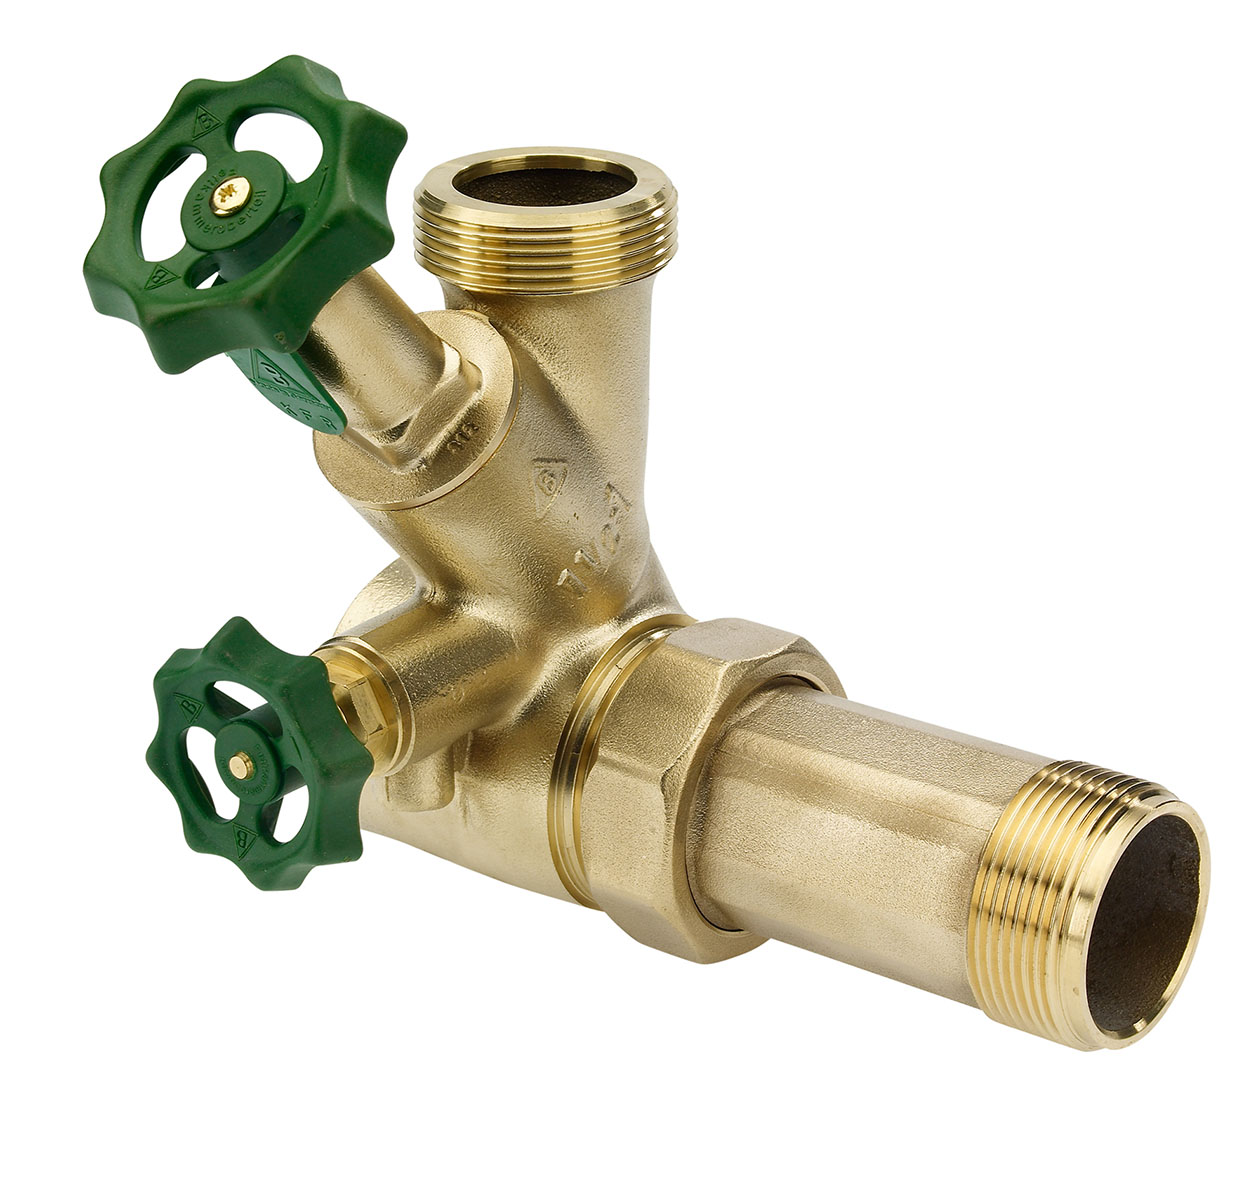 4007000 - CR-Brass Branch T-Valve Combined Free-flow and Backflow-preventer Body DN 50